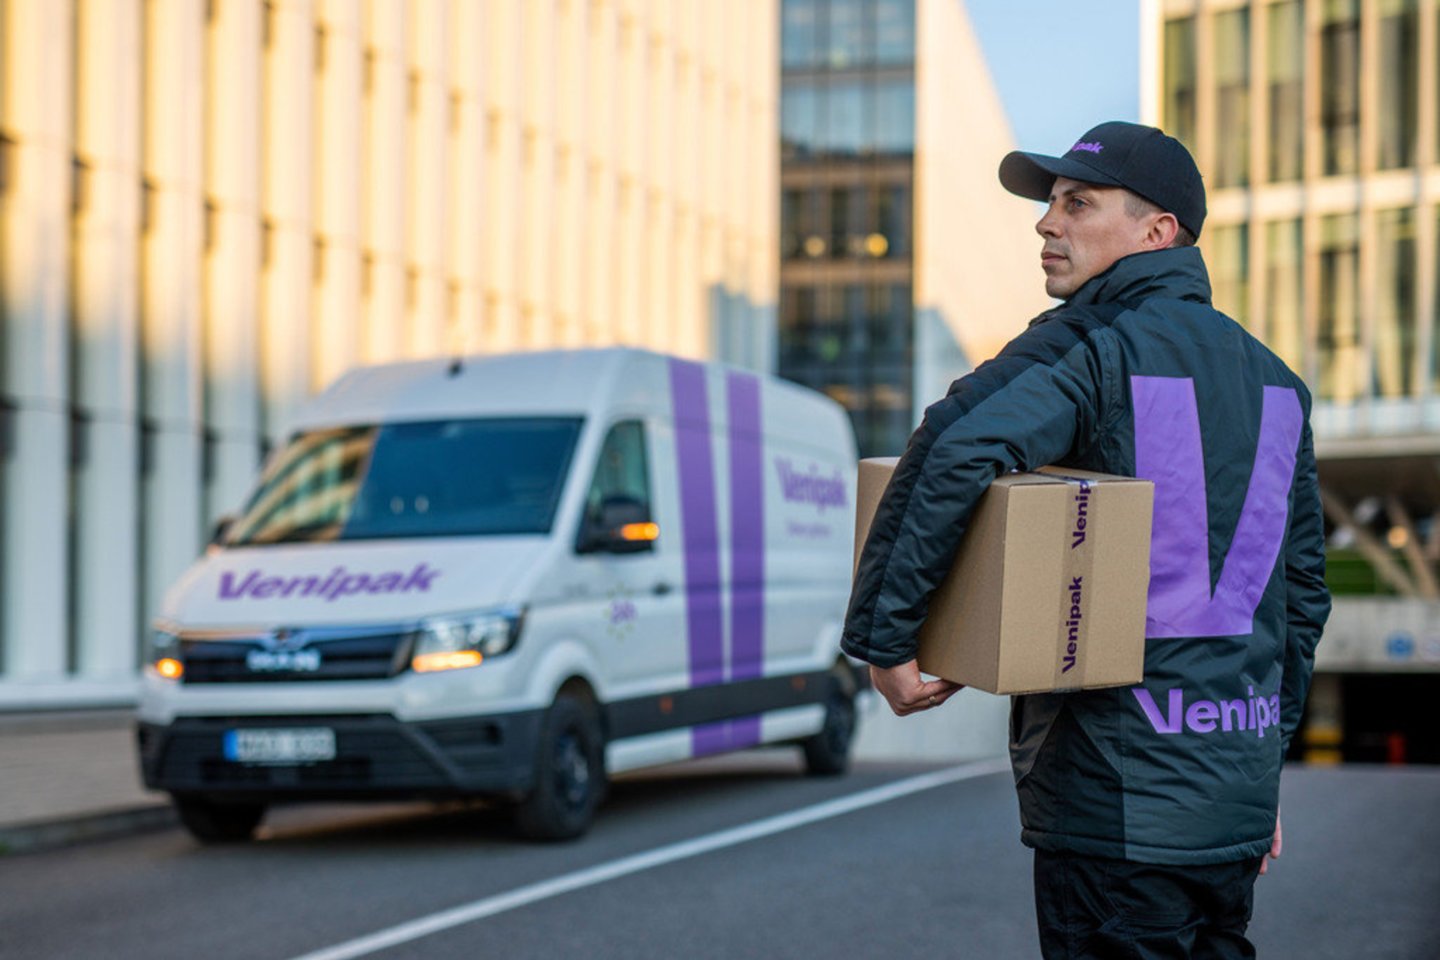 According to data from the international delivery company Venipak, which offers comprehensive order fulfillment (e-fulfillment) services to e-commerce companies, the need for e-fulfillment services in Lithuania is growing by about 40–50% every year.<br>„Twitter“ nuotr.